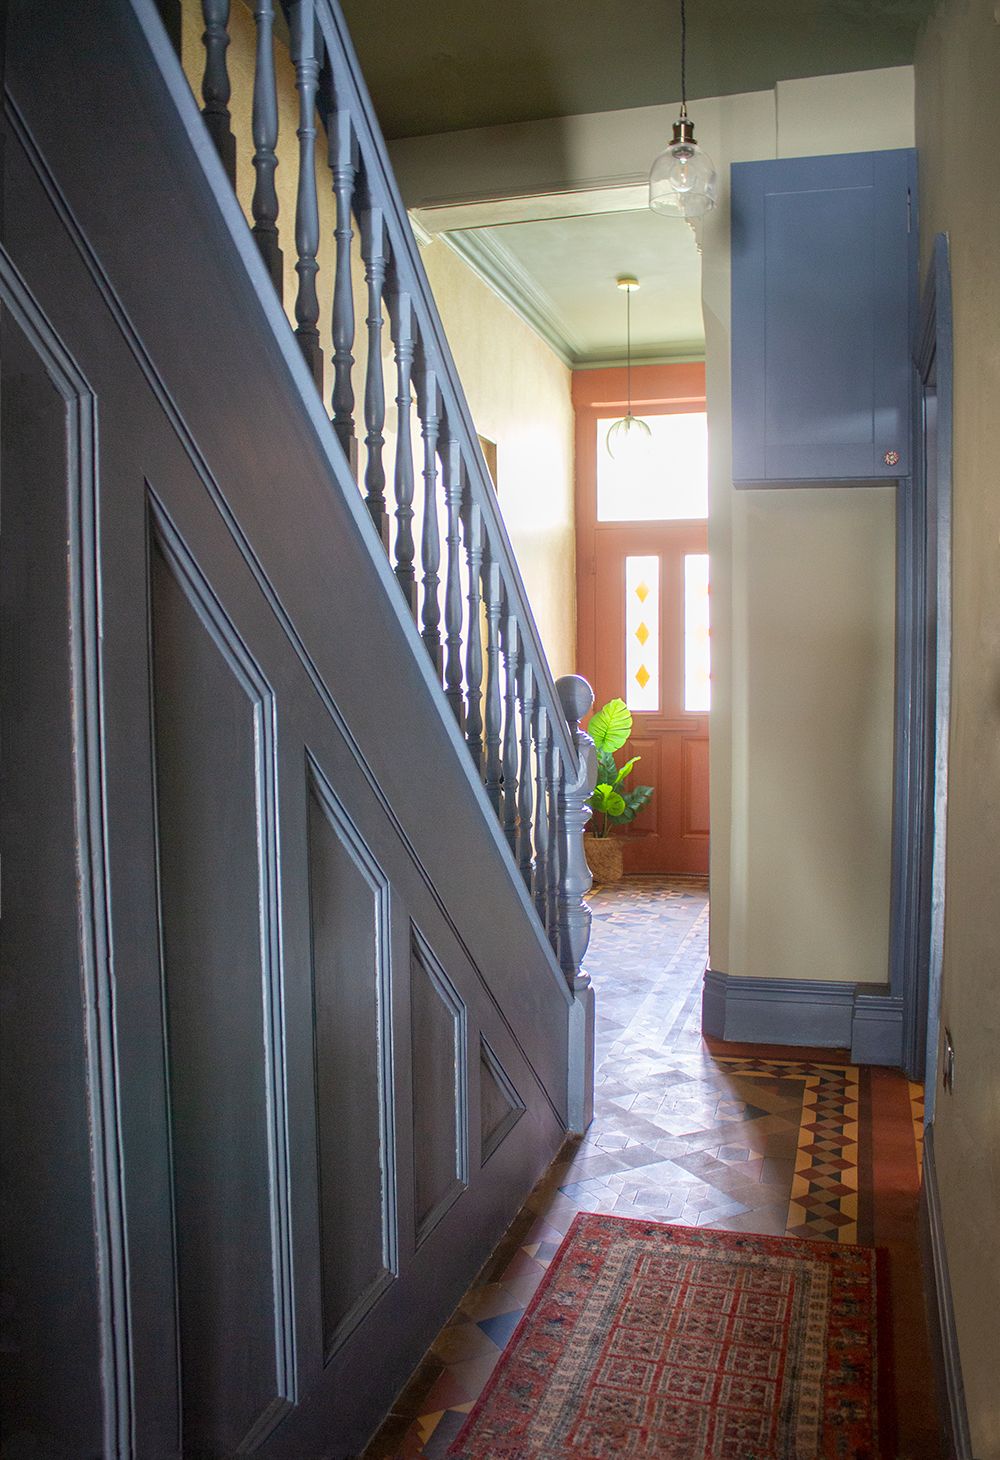 A photo taken looking past the stairs towards the front door. The stairs and paneling are painted blue and there is a red patterned rug on the original quarry tiles.